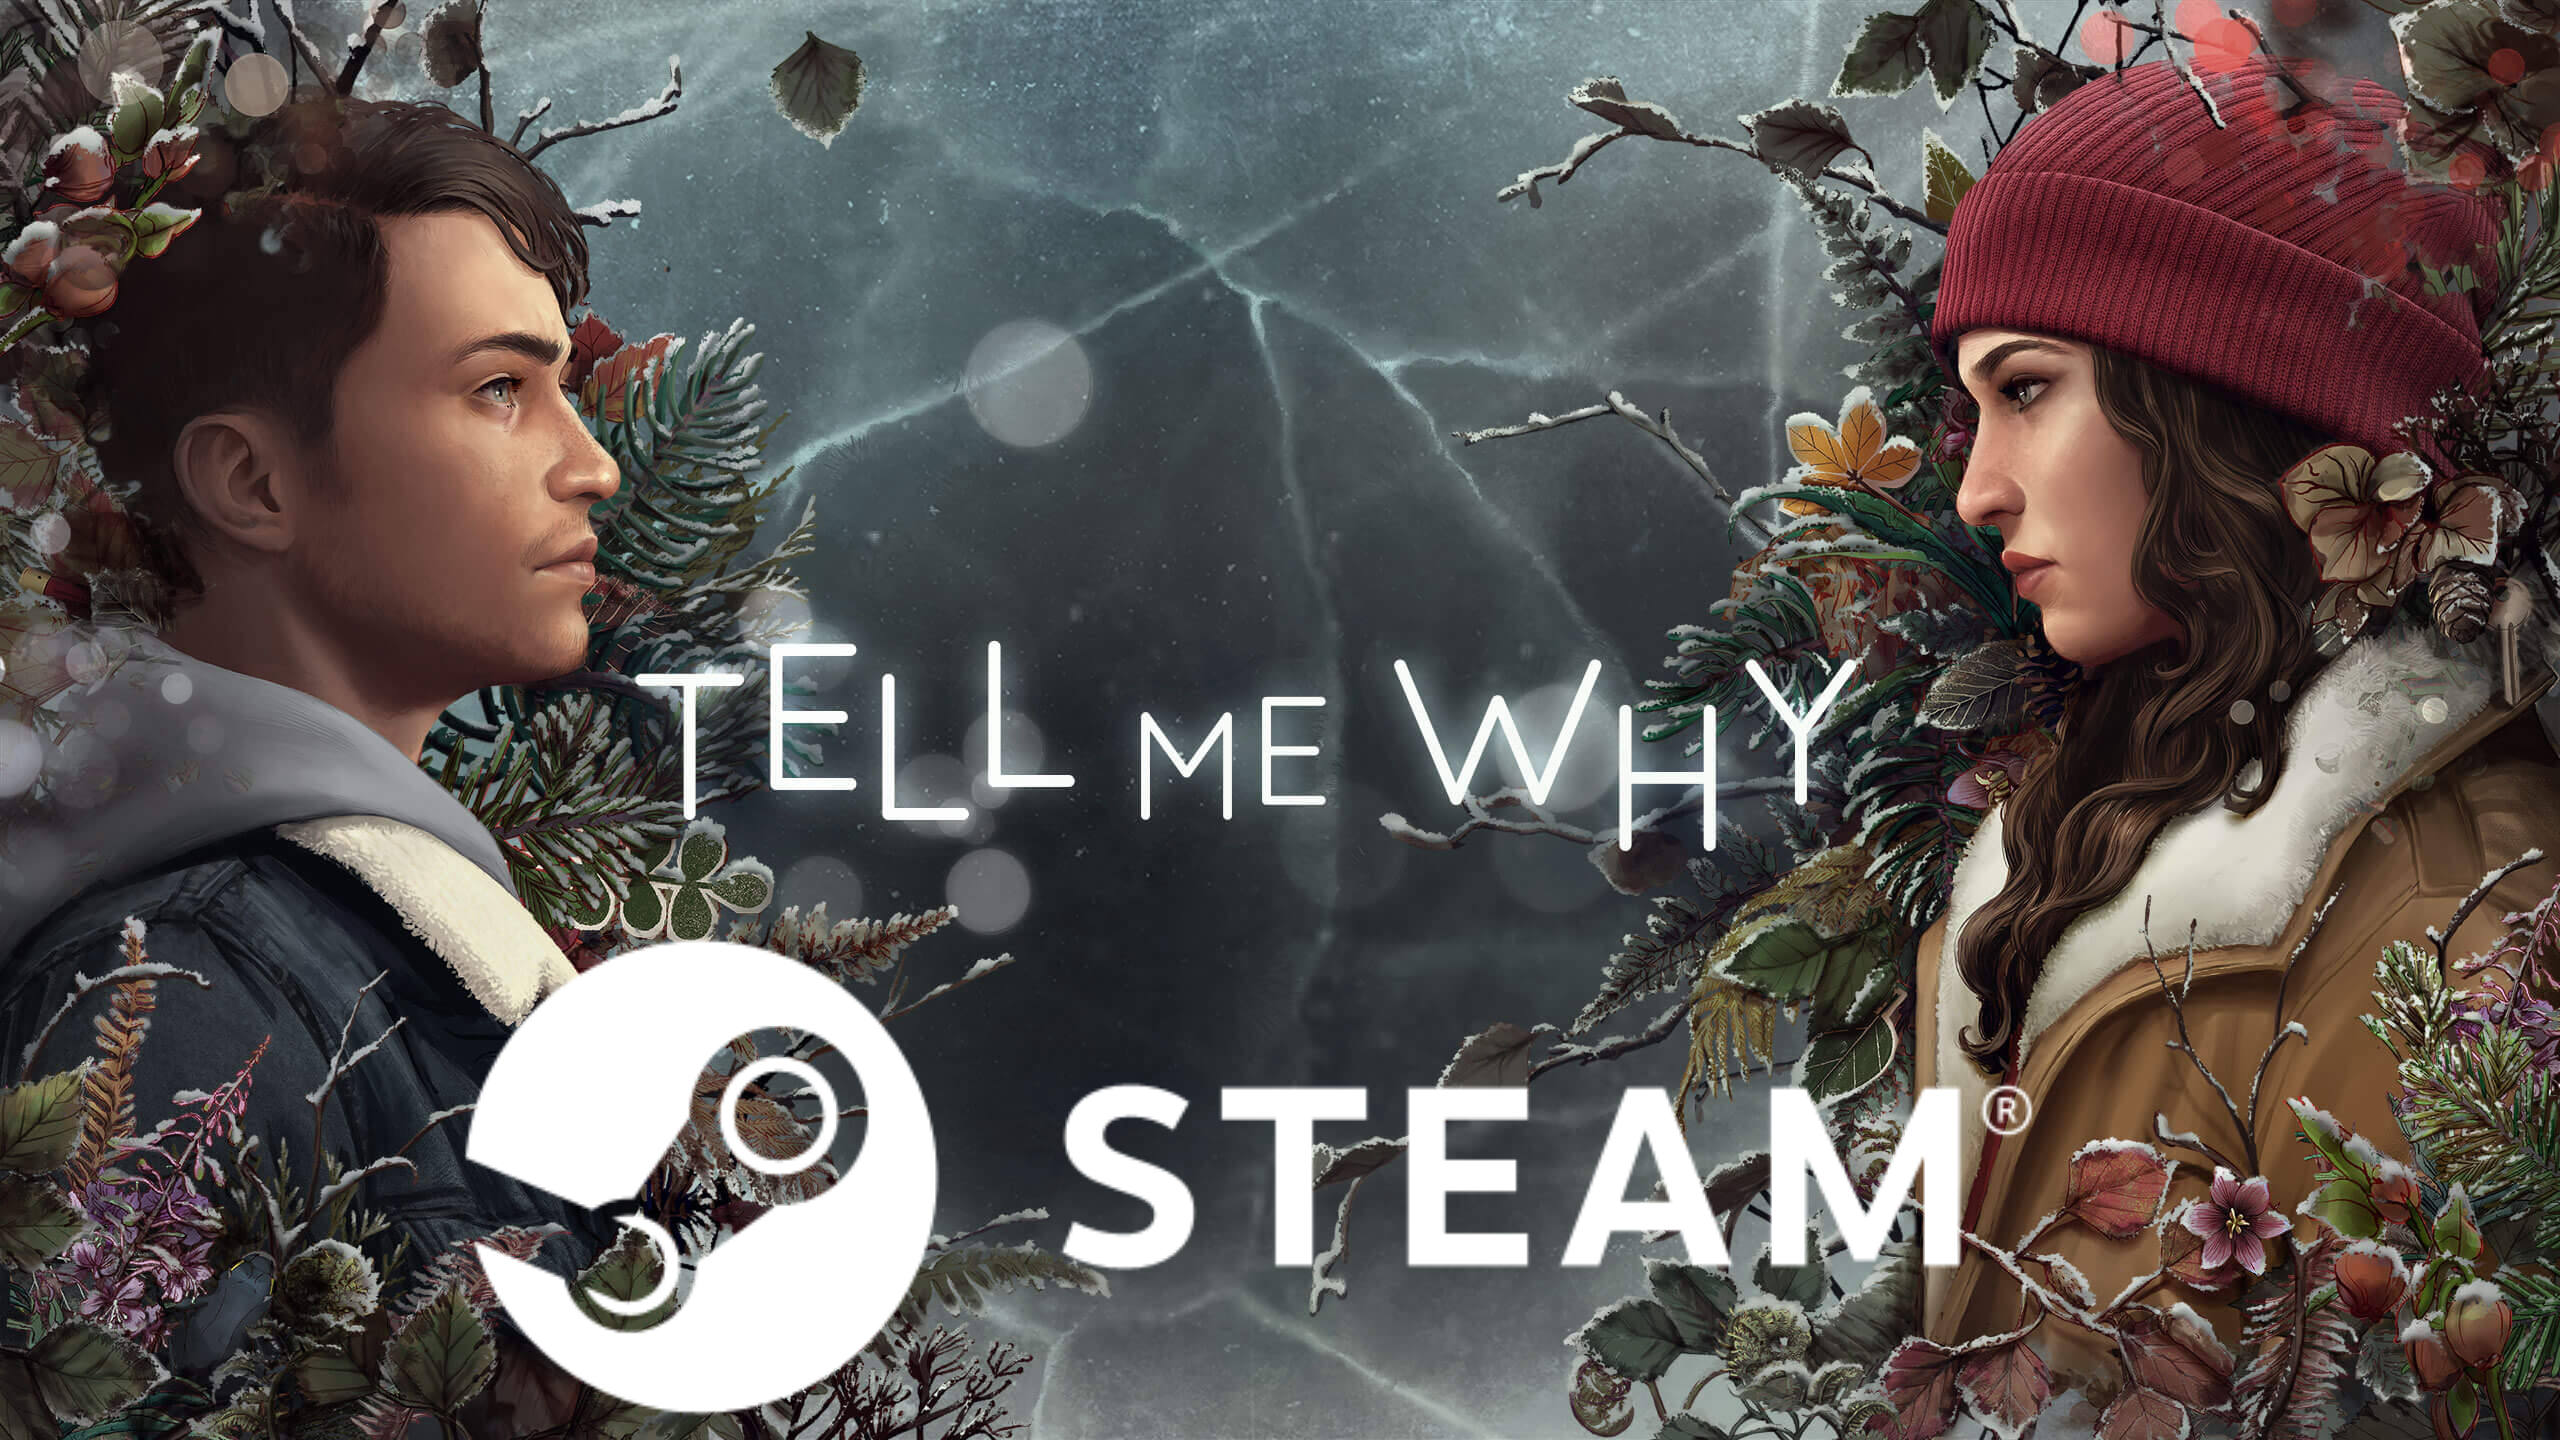 Tell me why (игра). Tell me why обложка. Tell me why Steam. Tell me why игра любовные линии. Tell me why to do